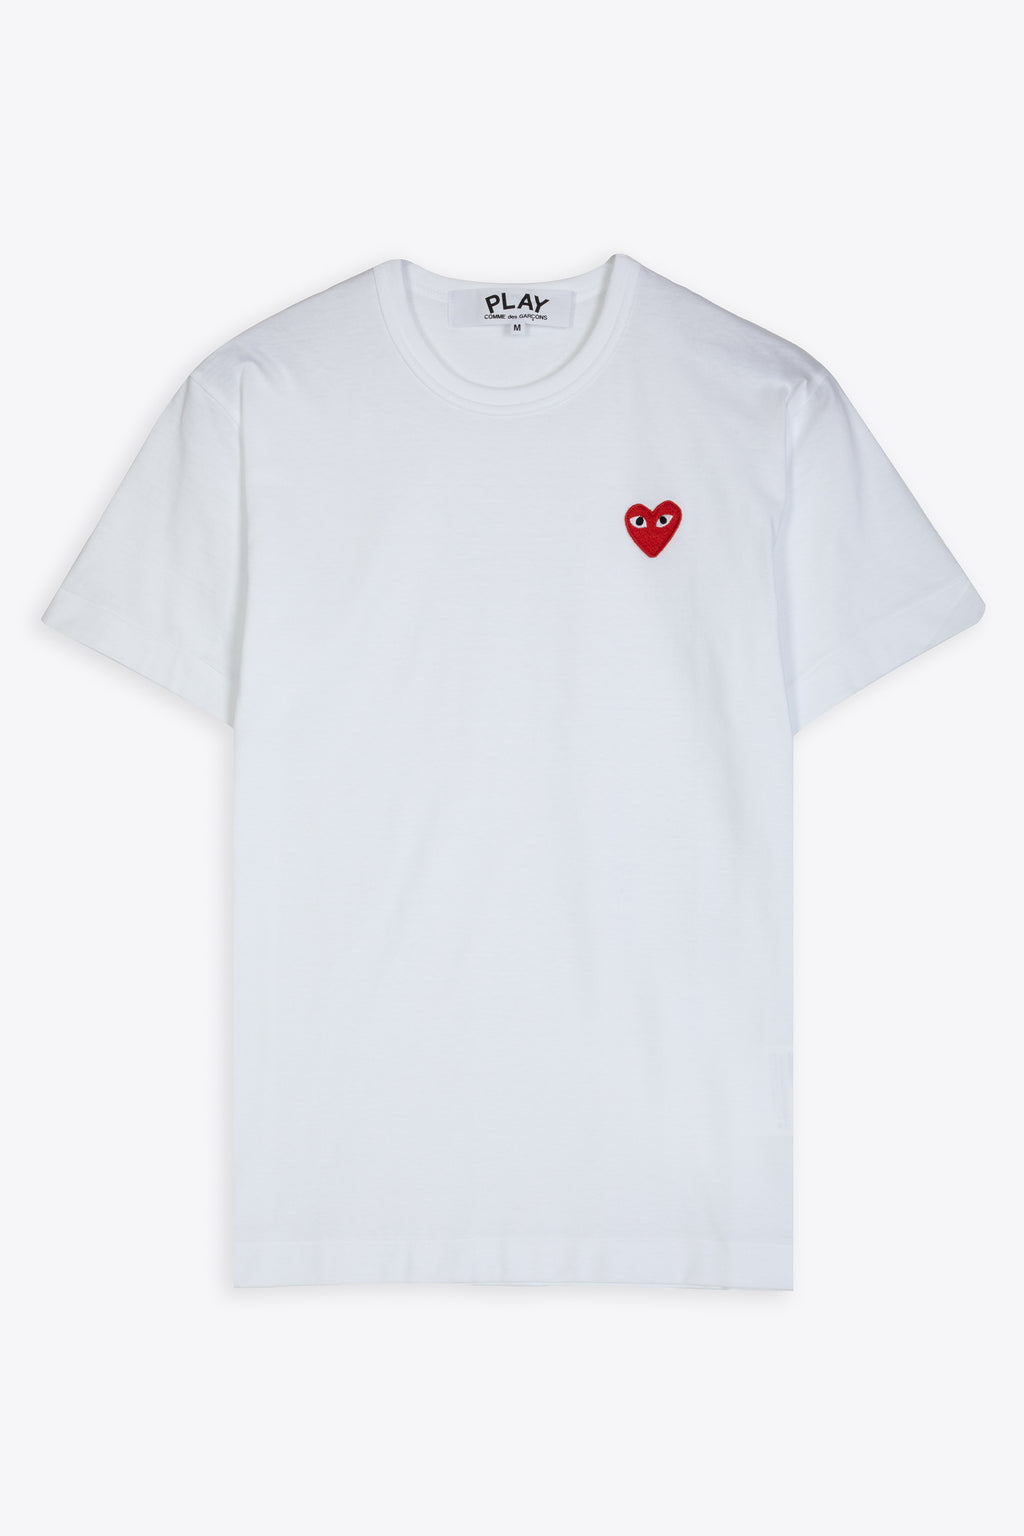 alt-image__White-cotton-t-shirt-with-red-heart-patch-at-chest